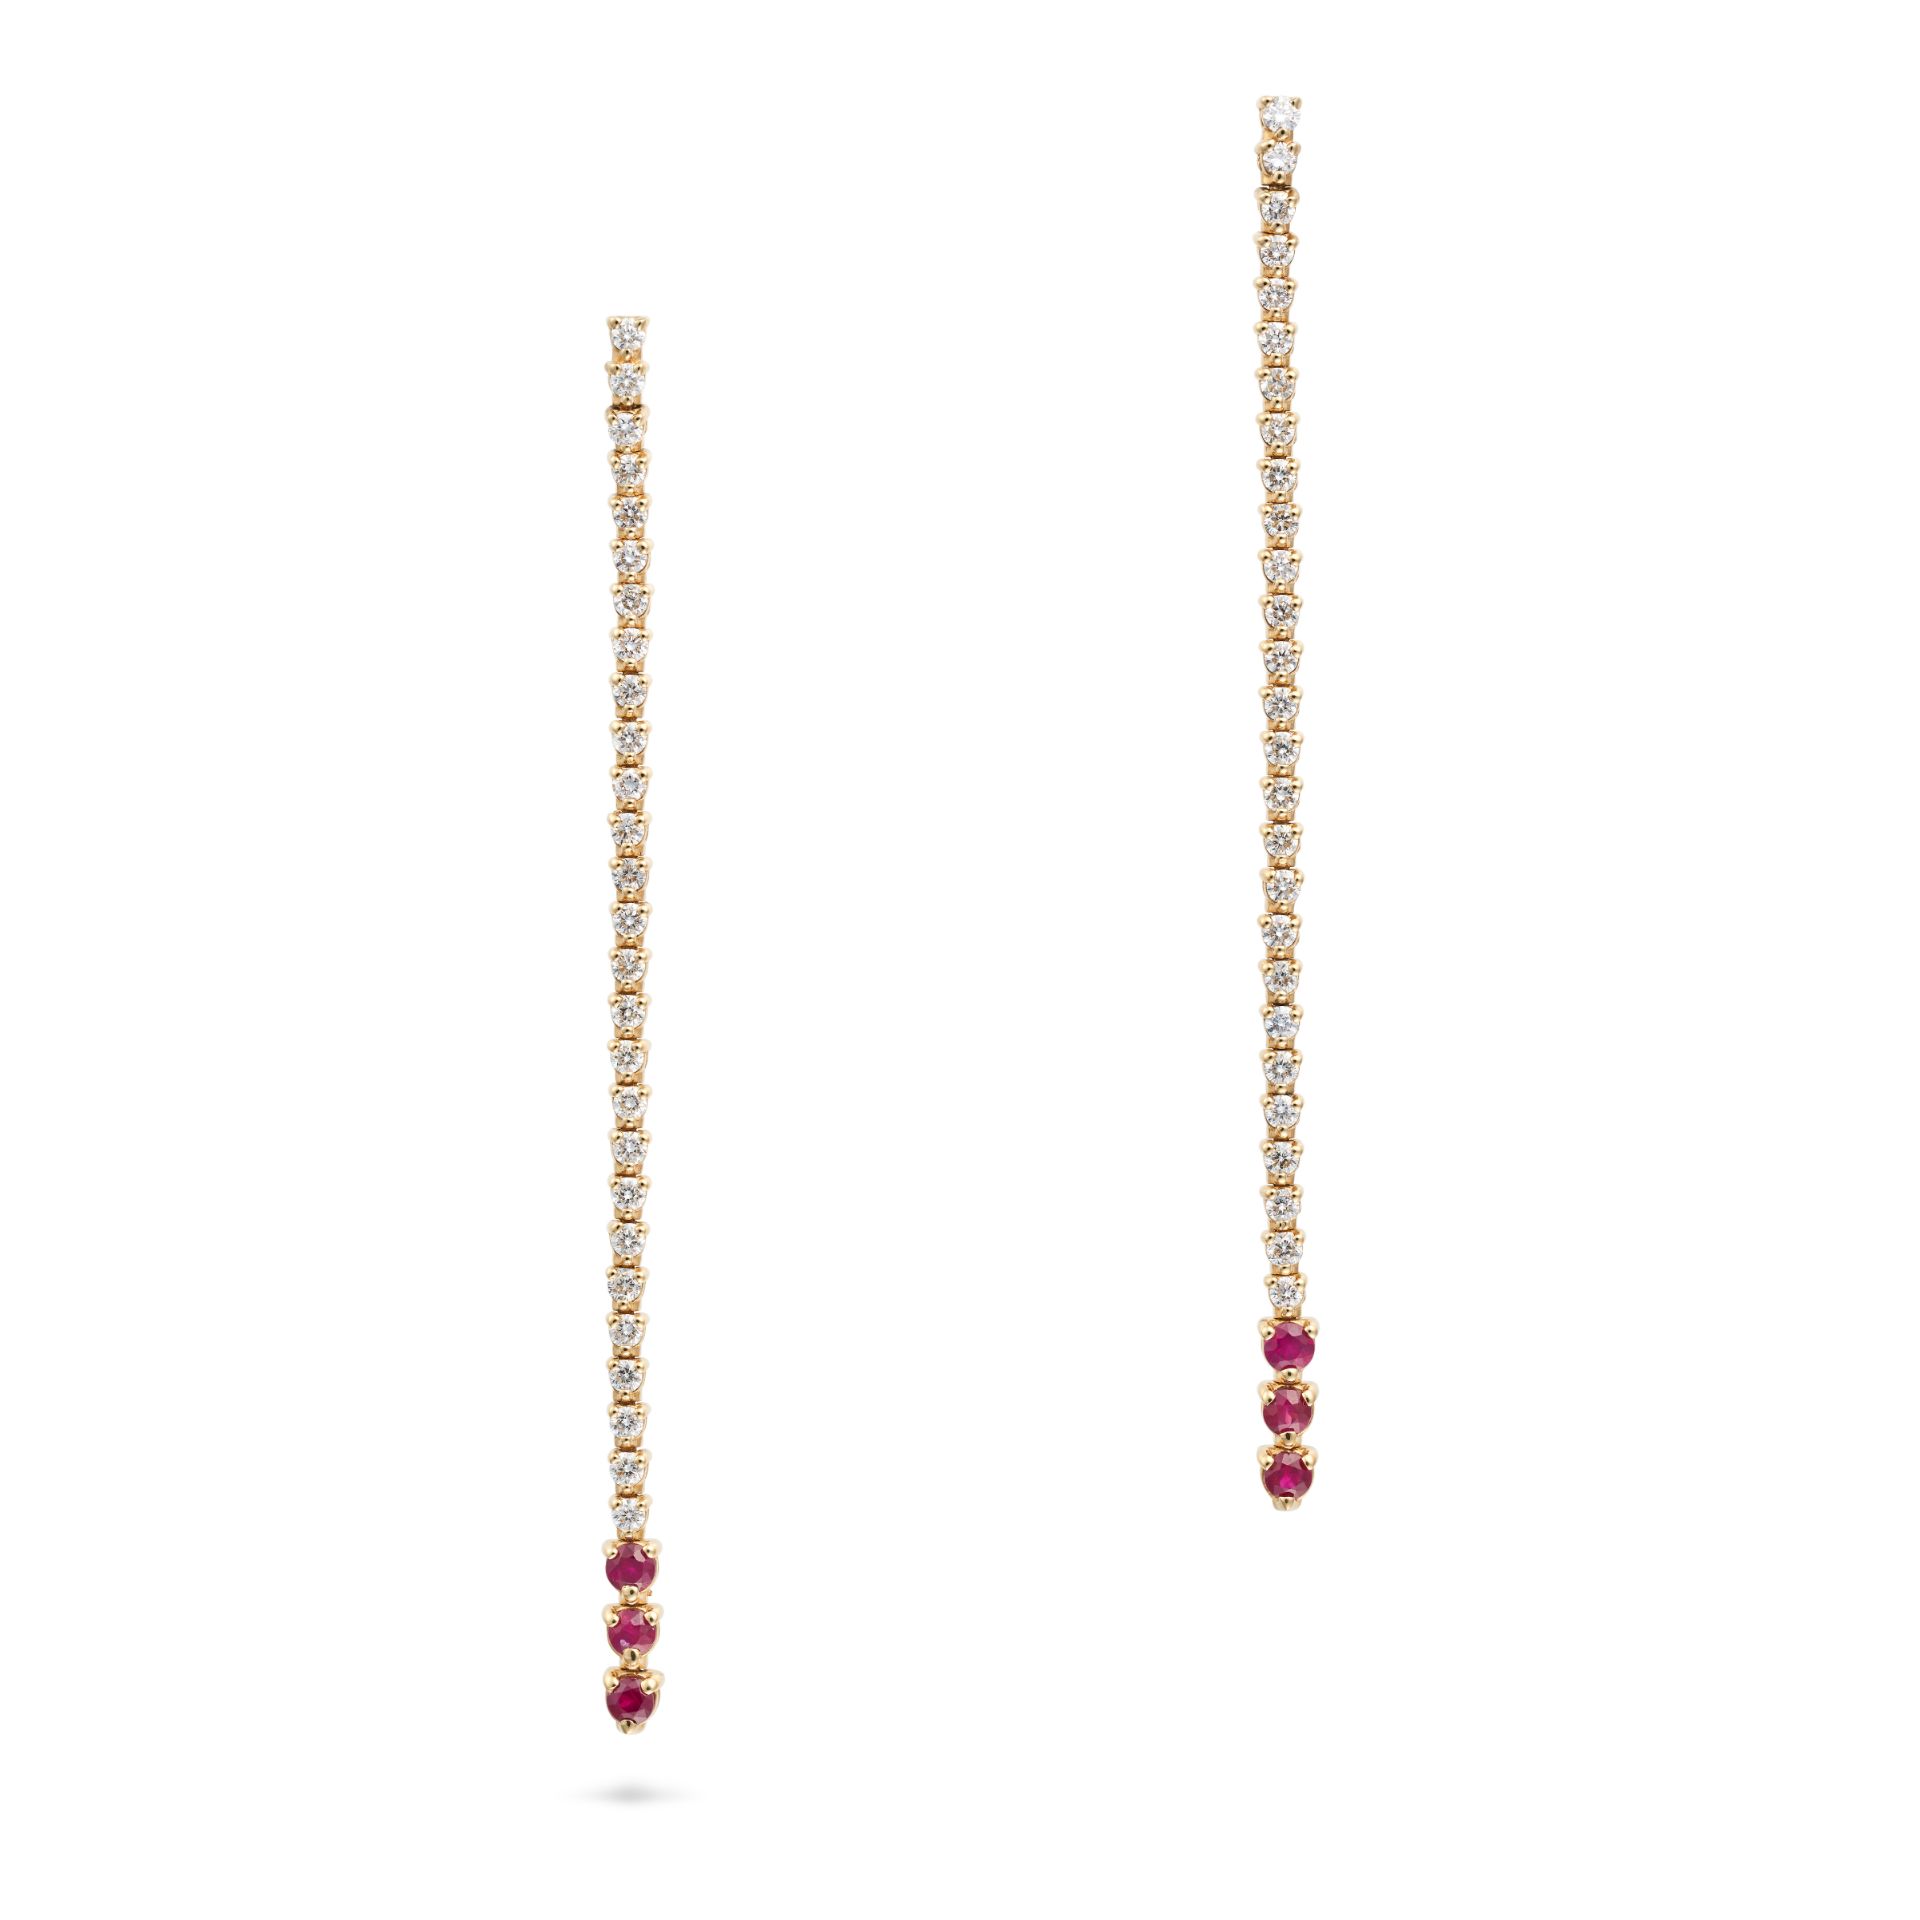 A PAIR OF RUBY AND DIAMOND DROP EARRINGS each comprising a row of round brilliant cut diamonds an...